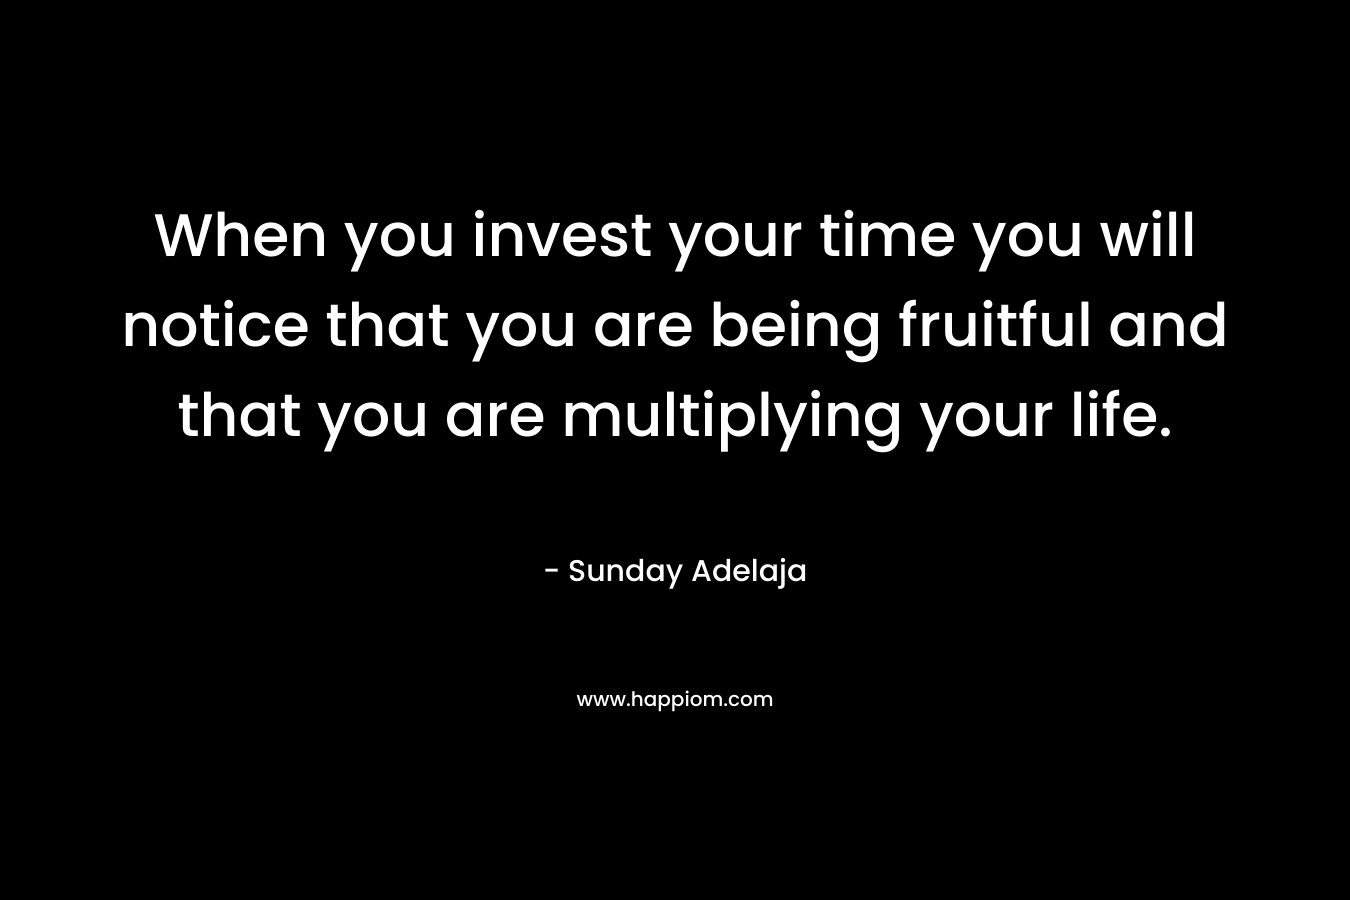 When you invest your time you will notice that you are being fruitful and that you are multiplying your life. – Sunday Adelaja